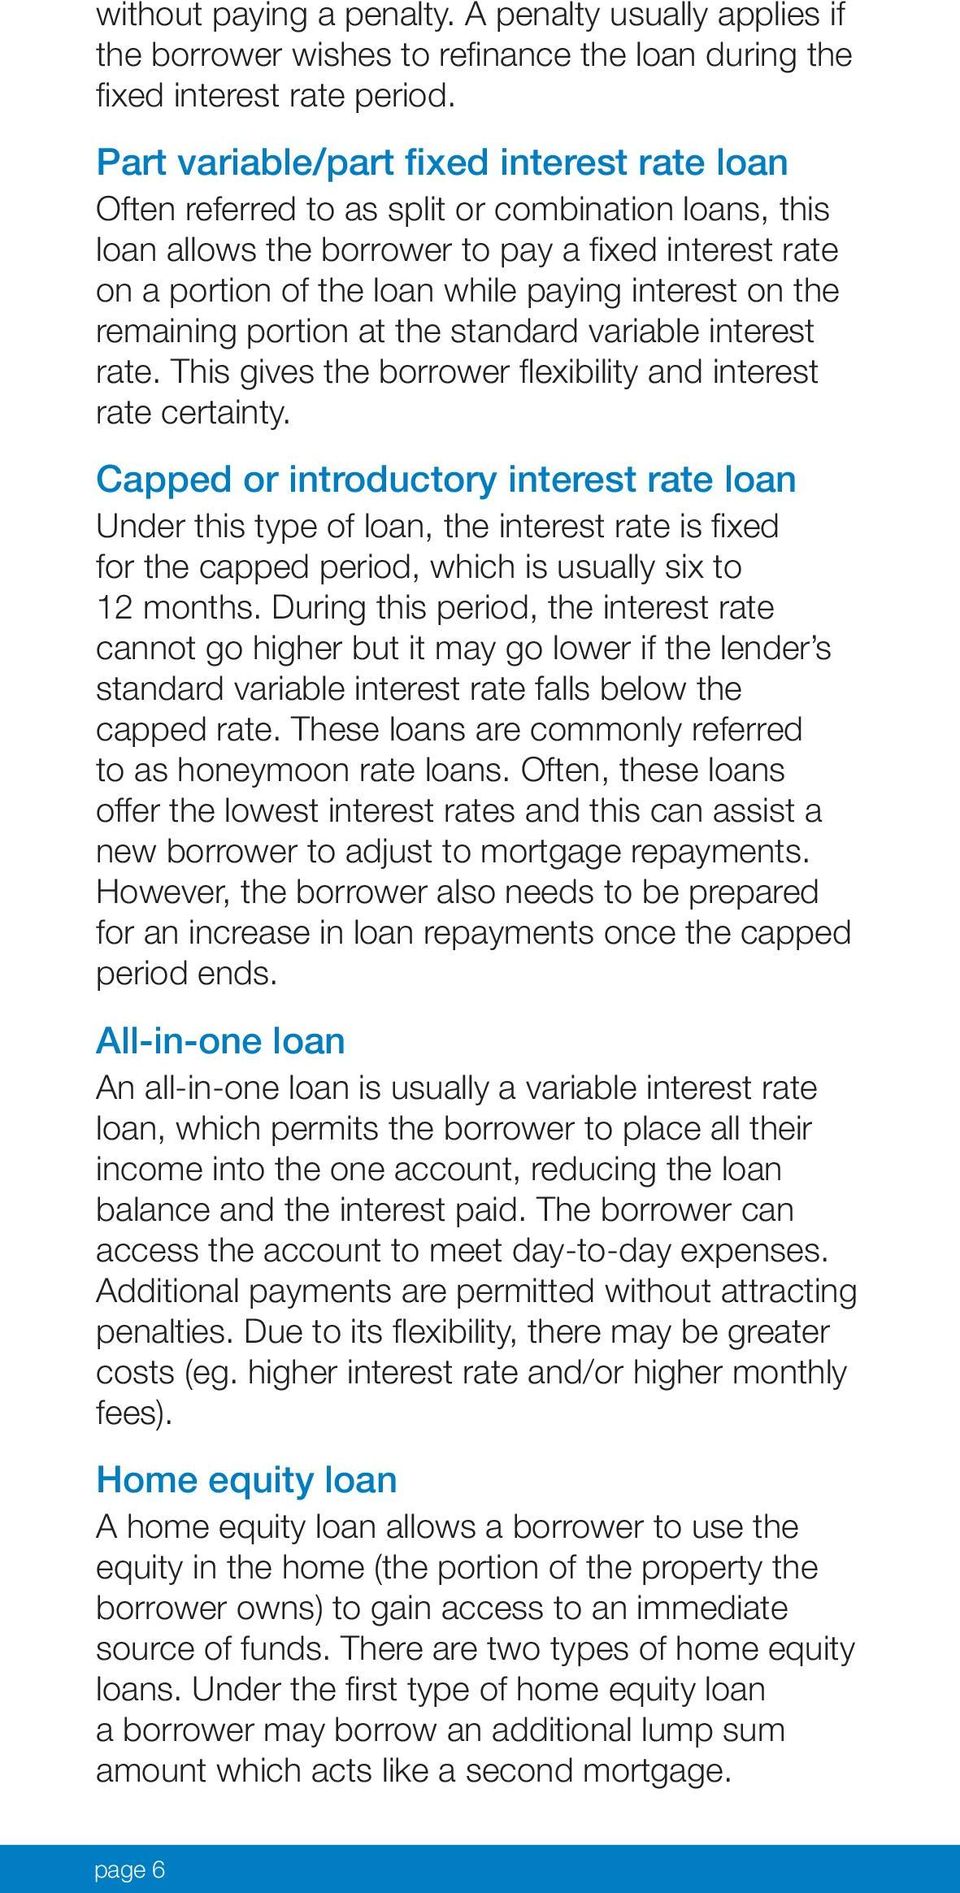 on the remaining portion at the standard variable interest rate. This gives the borrower flexibility and interest rate certainty.